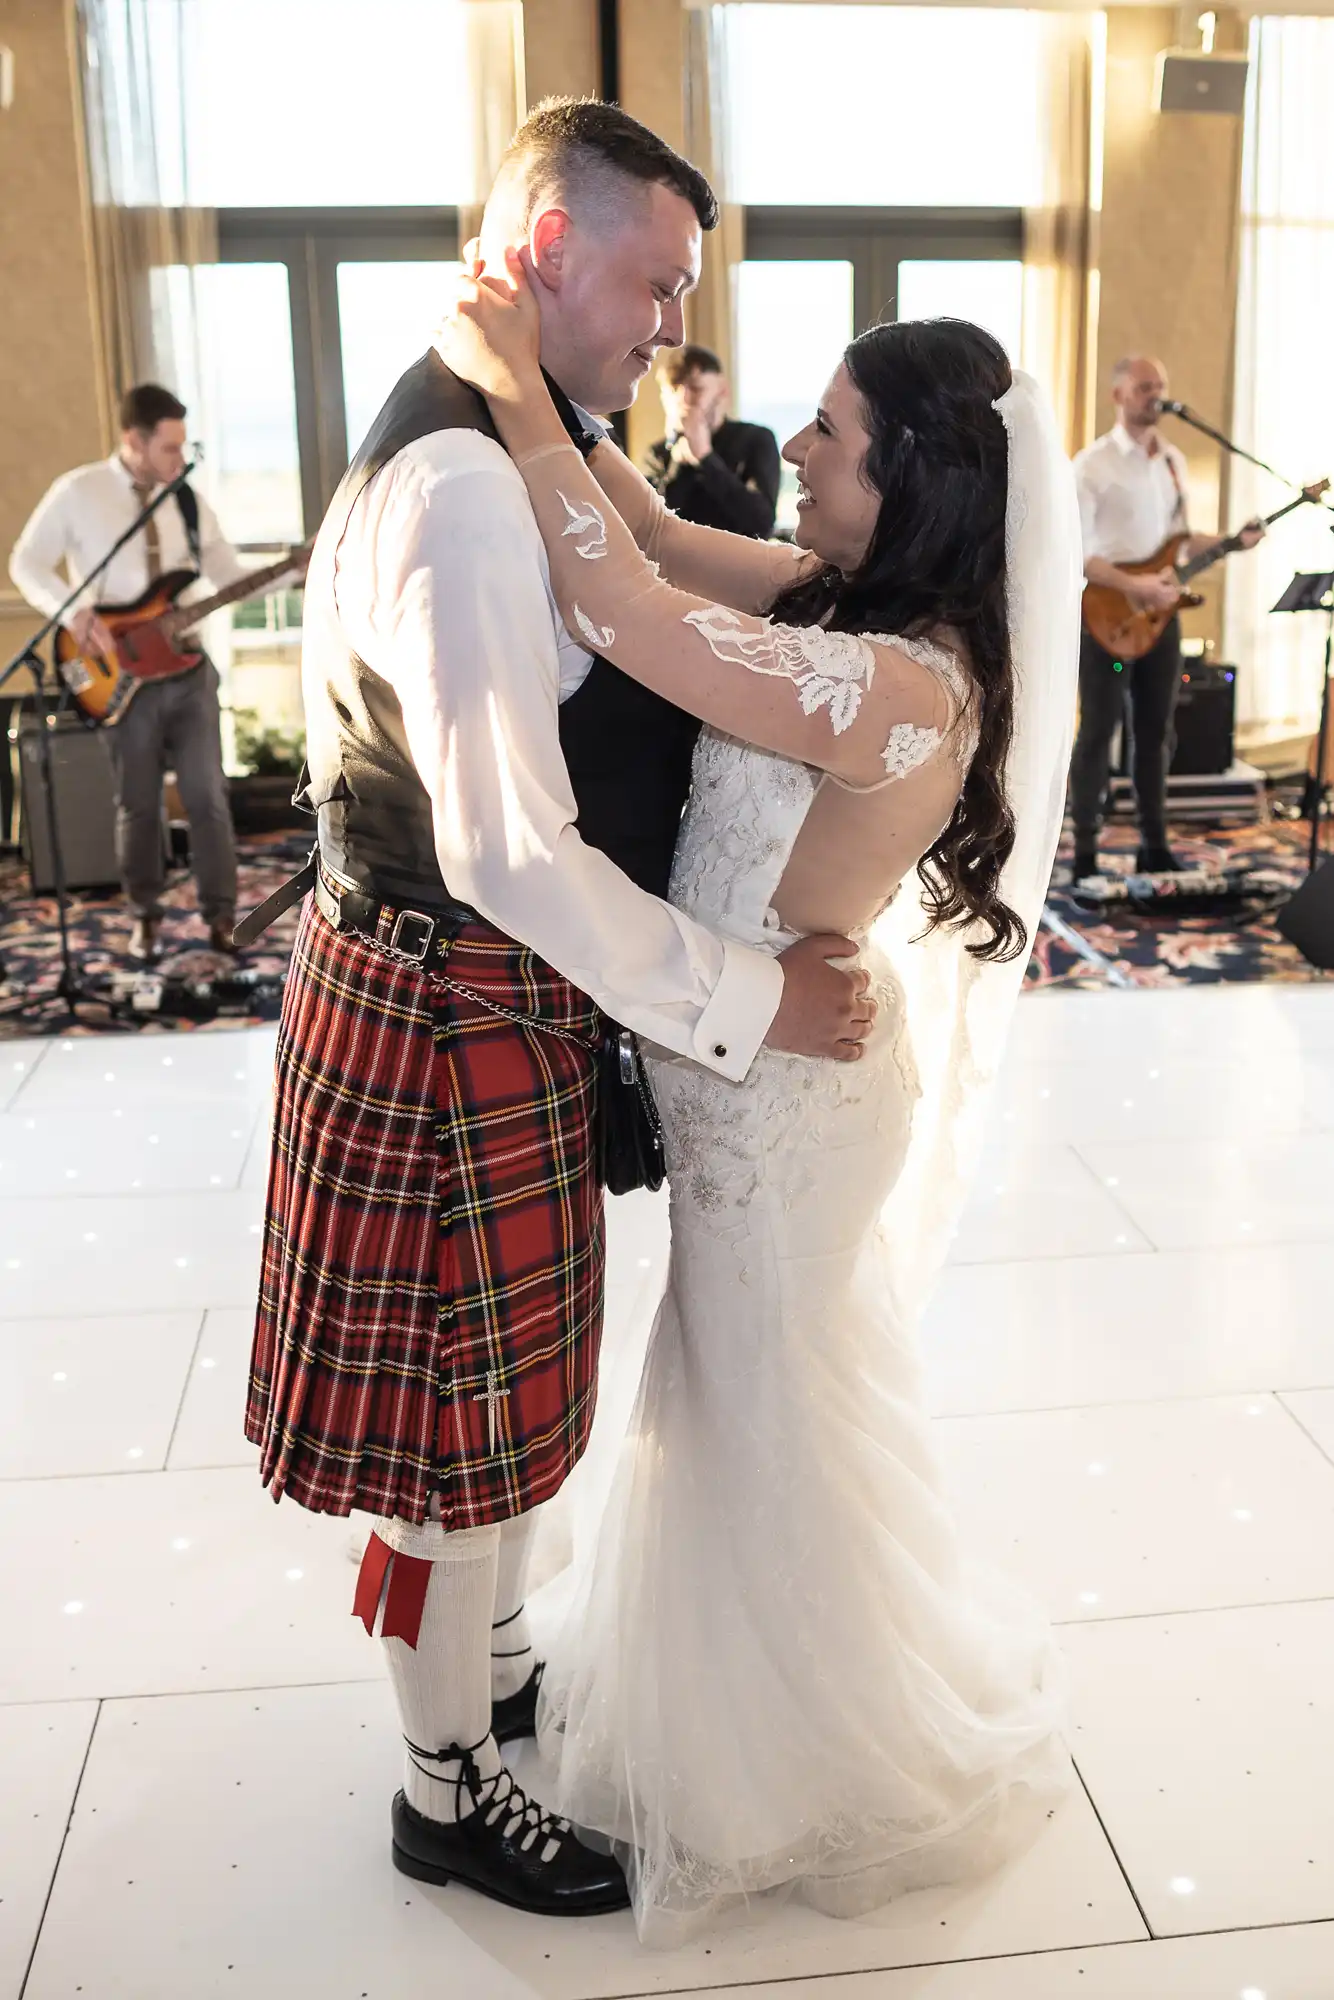 A bride in a white lace dress and a groom in a tartan kilt share a joyful dance at their wedding reception, with a band performing in the background.